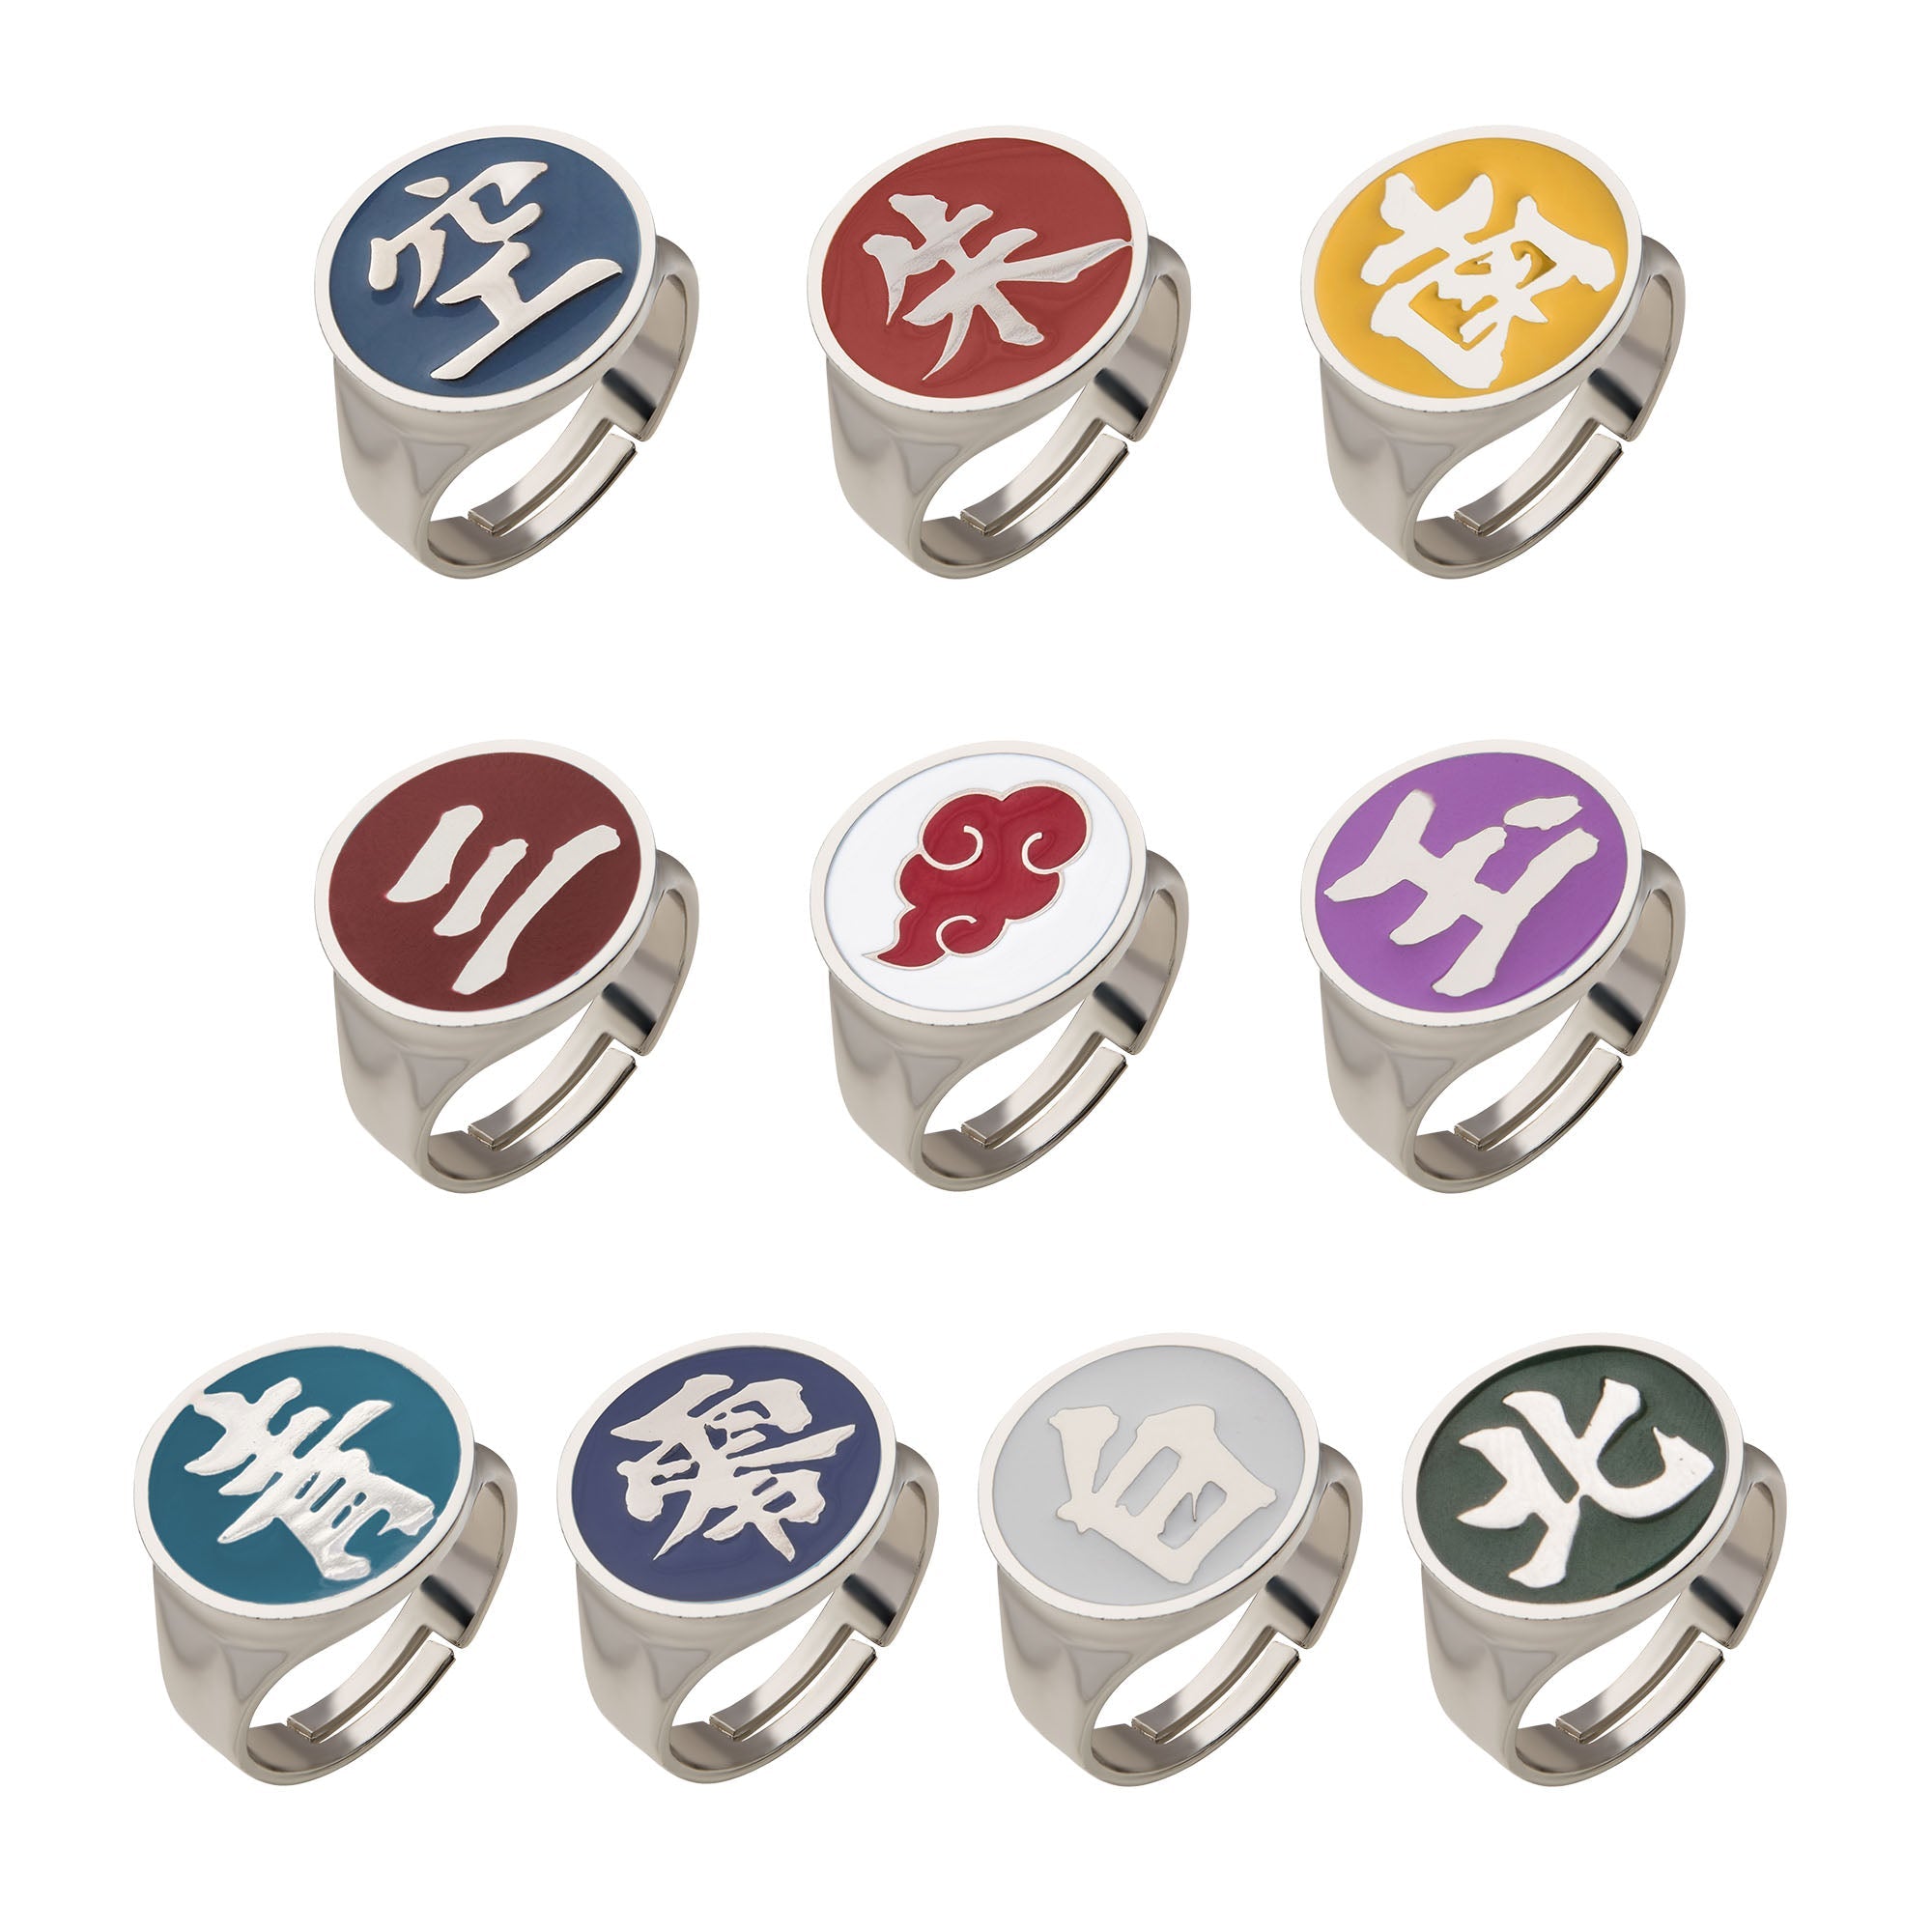 Naruto - Akatsuki Rings for XPS by Rycempler on DeviantArt